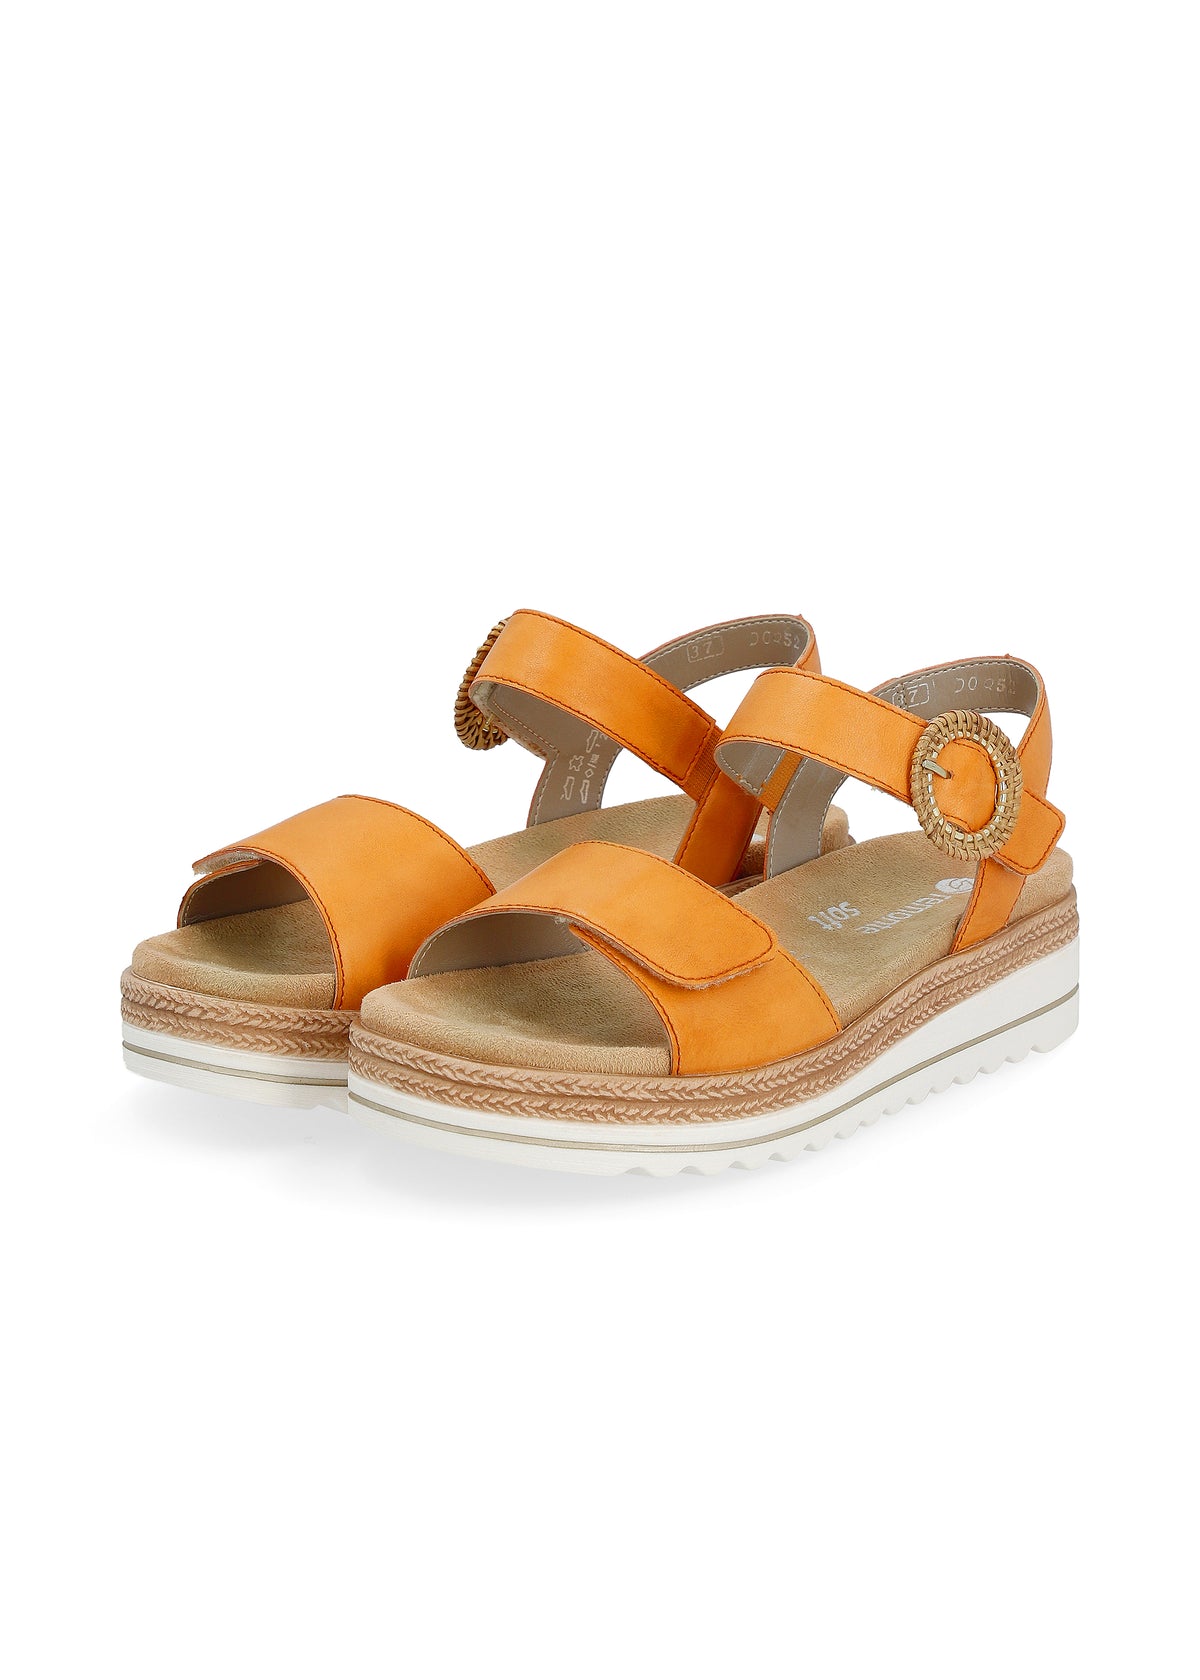 Sandals with a thick sole - mandarin yellow, buckle decoration